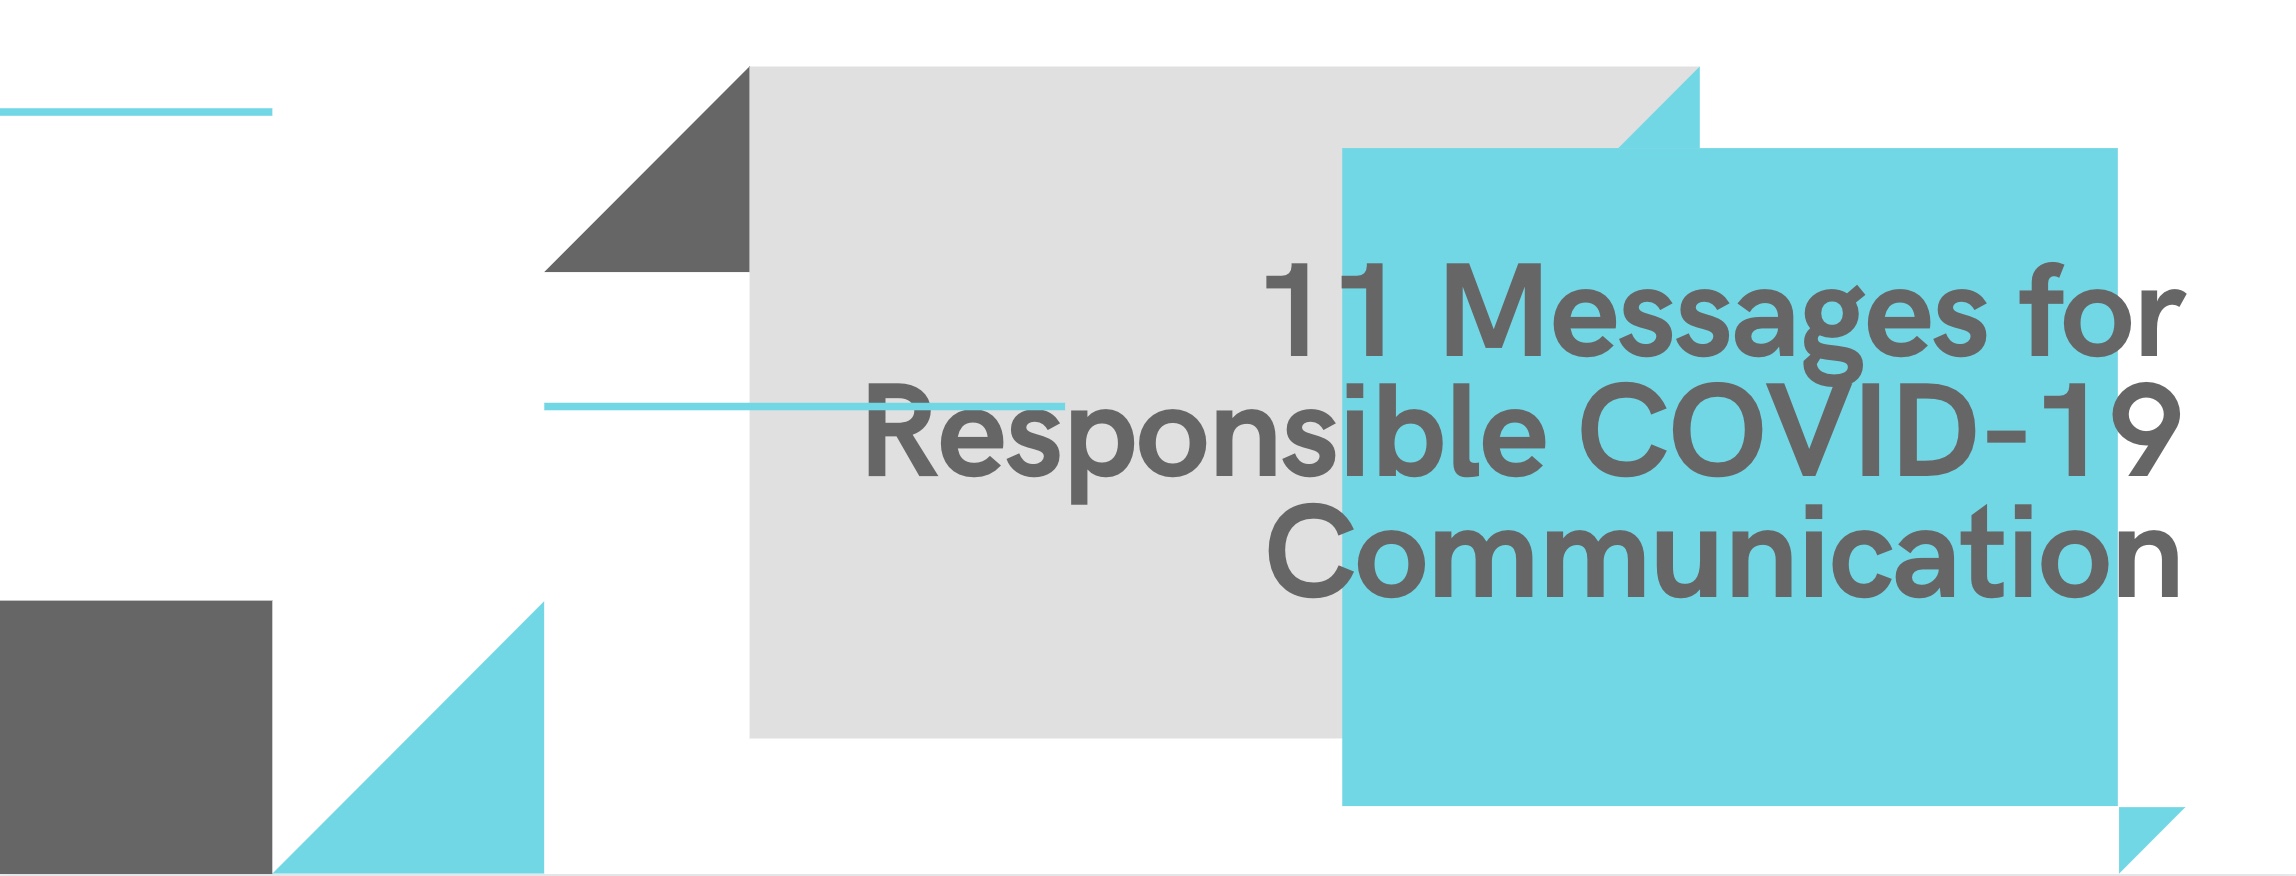 11 Messages for Responsible COVID-19 Communication